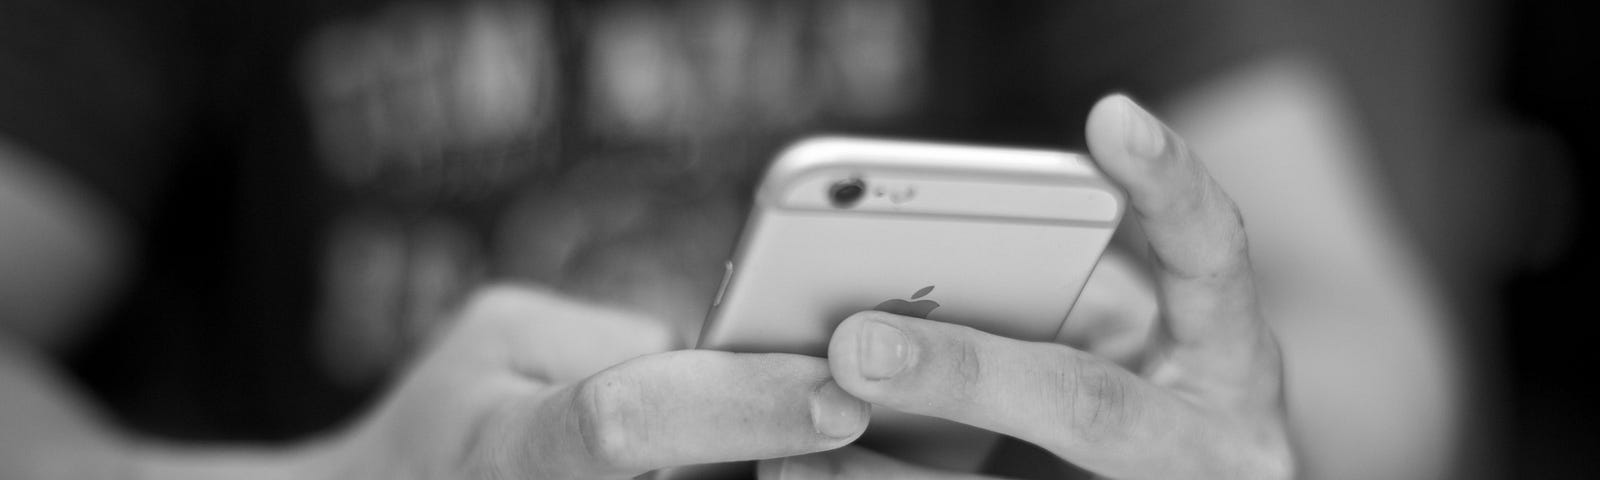 Two hands in close up hold an iPhone. The rest of the user’s body is blurred.